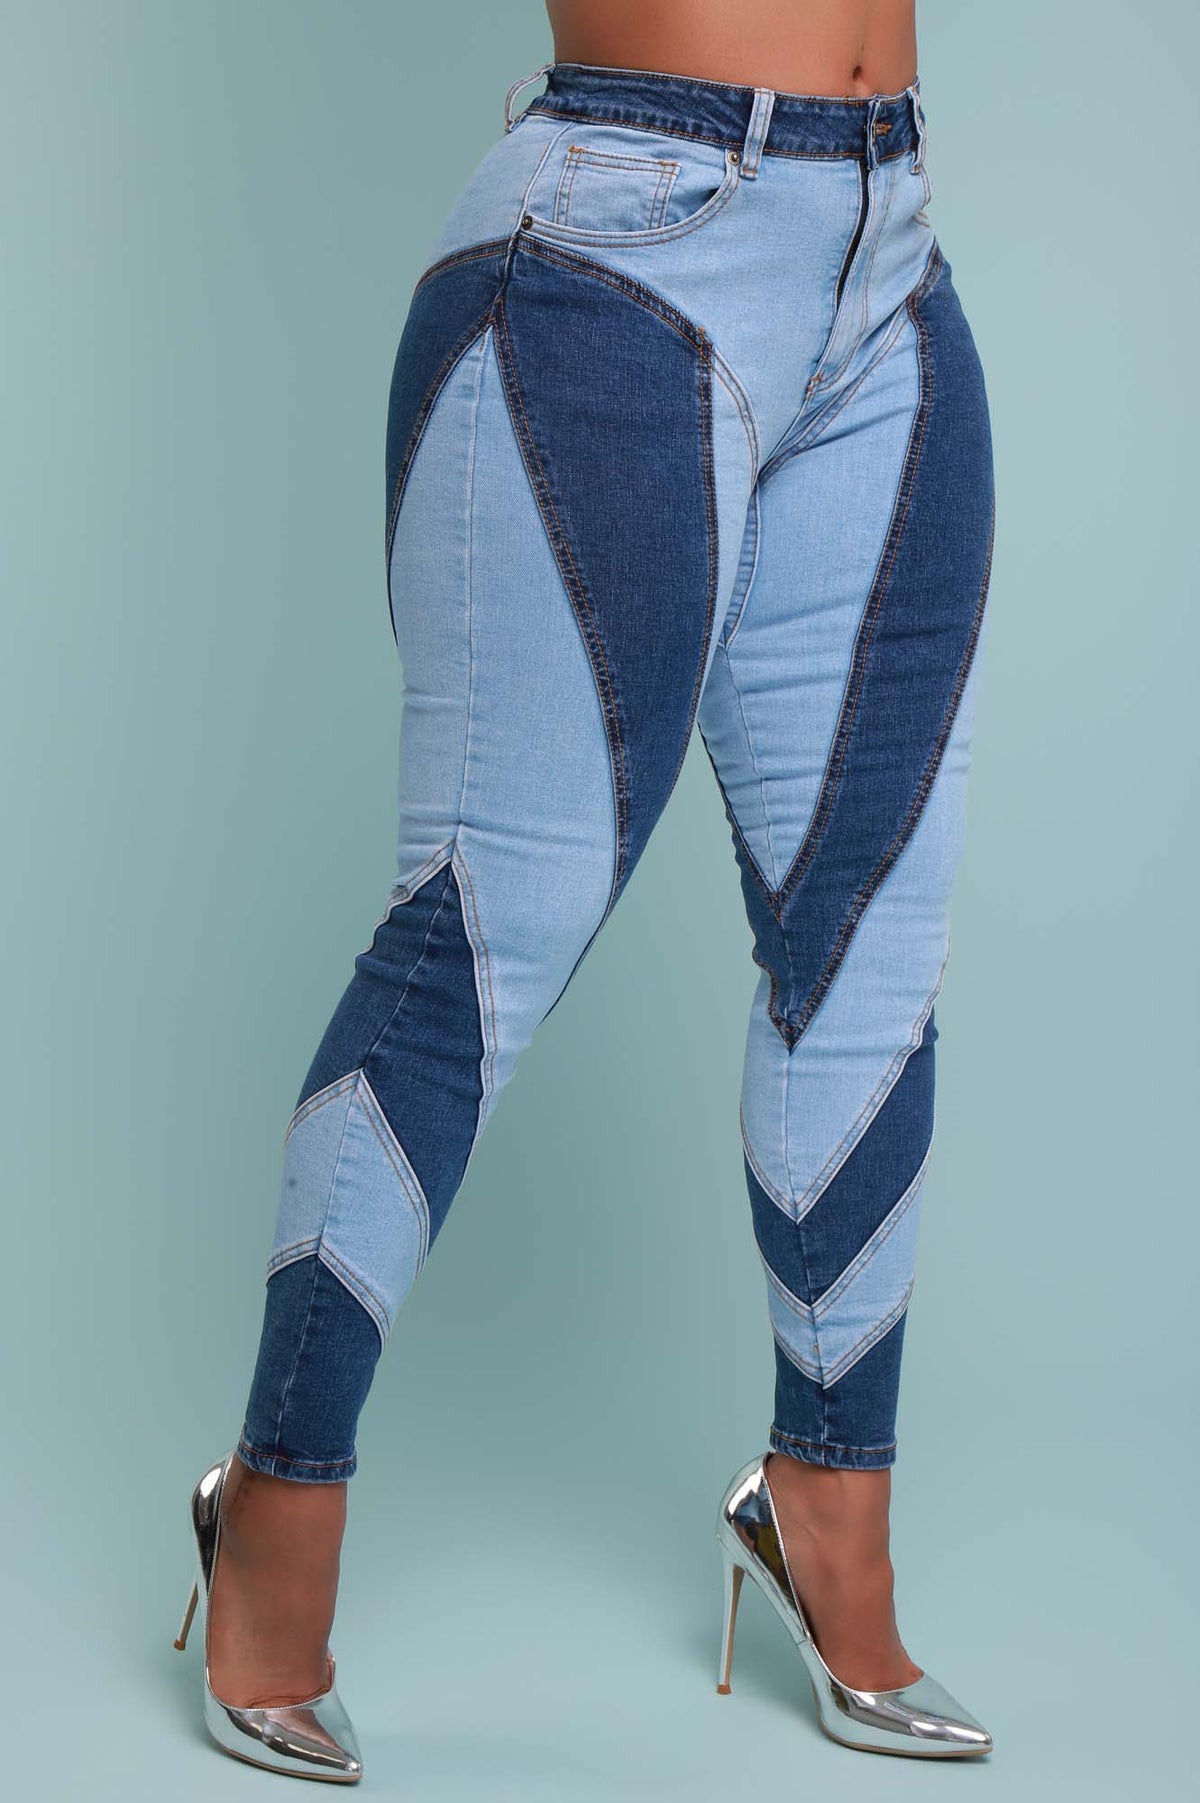 
              Two Faced Patchwork Skinny Jeans - Blue/Light Blue - Swank A Posh
            